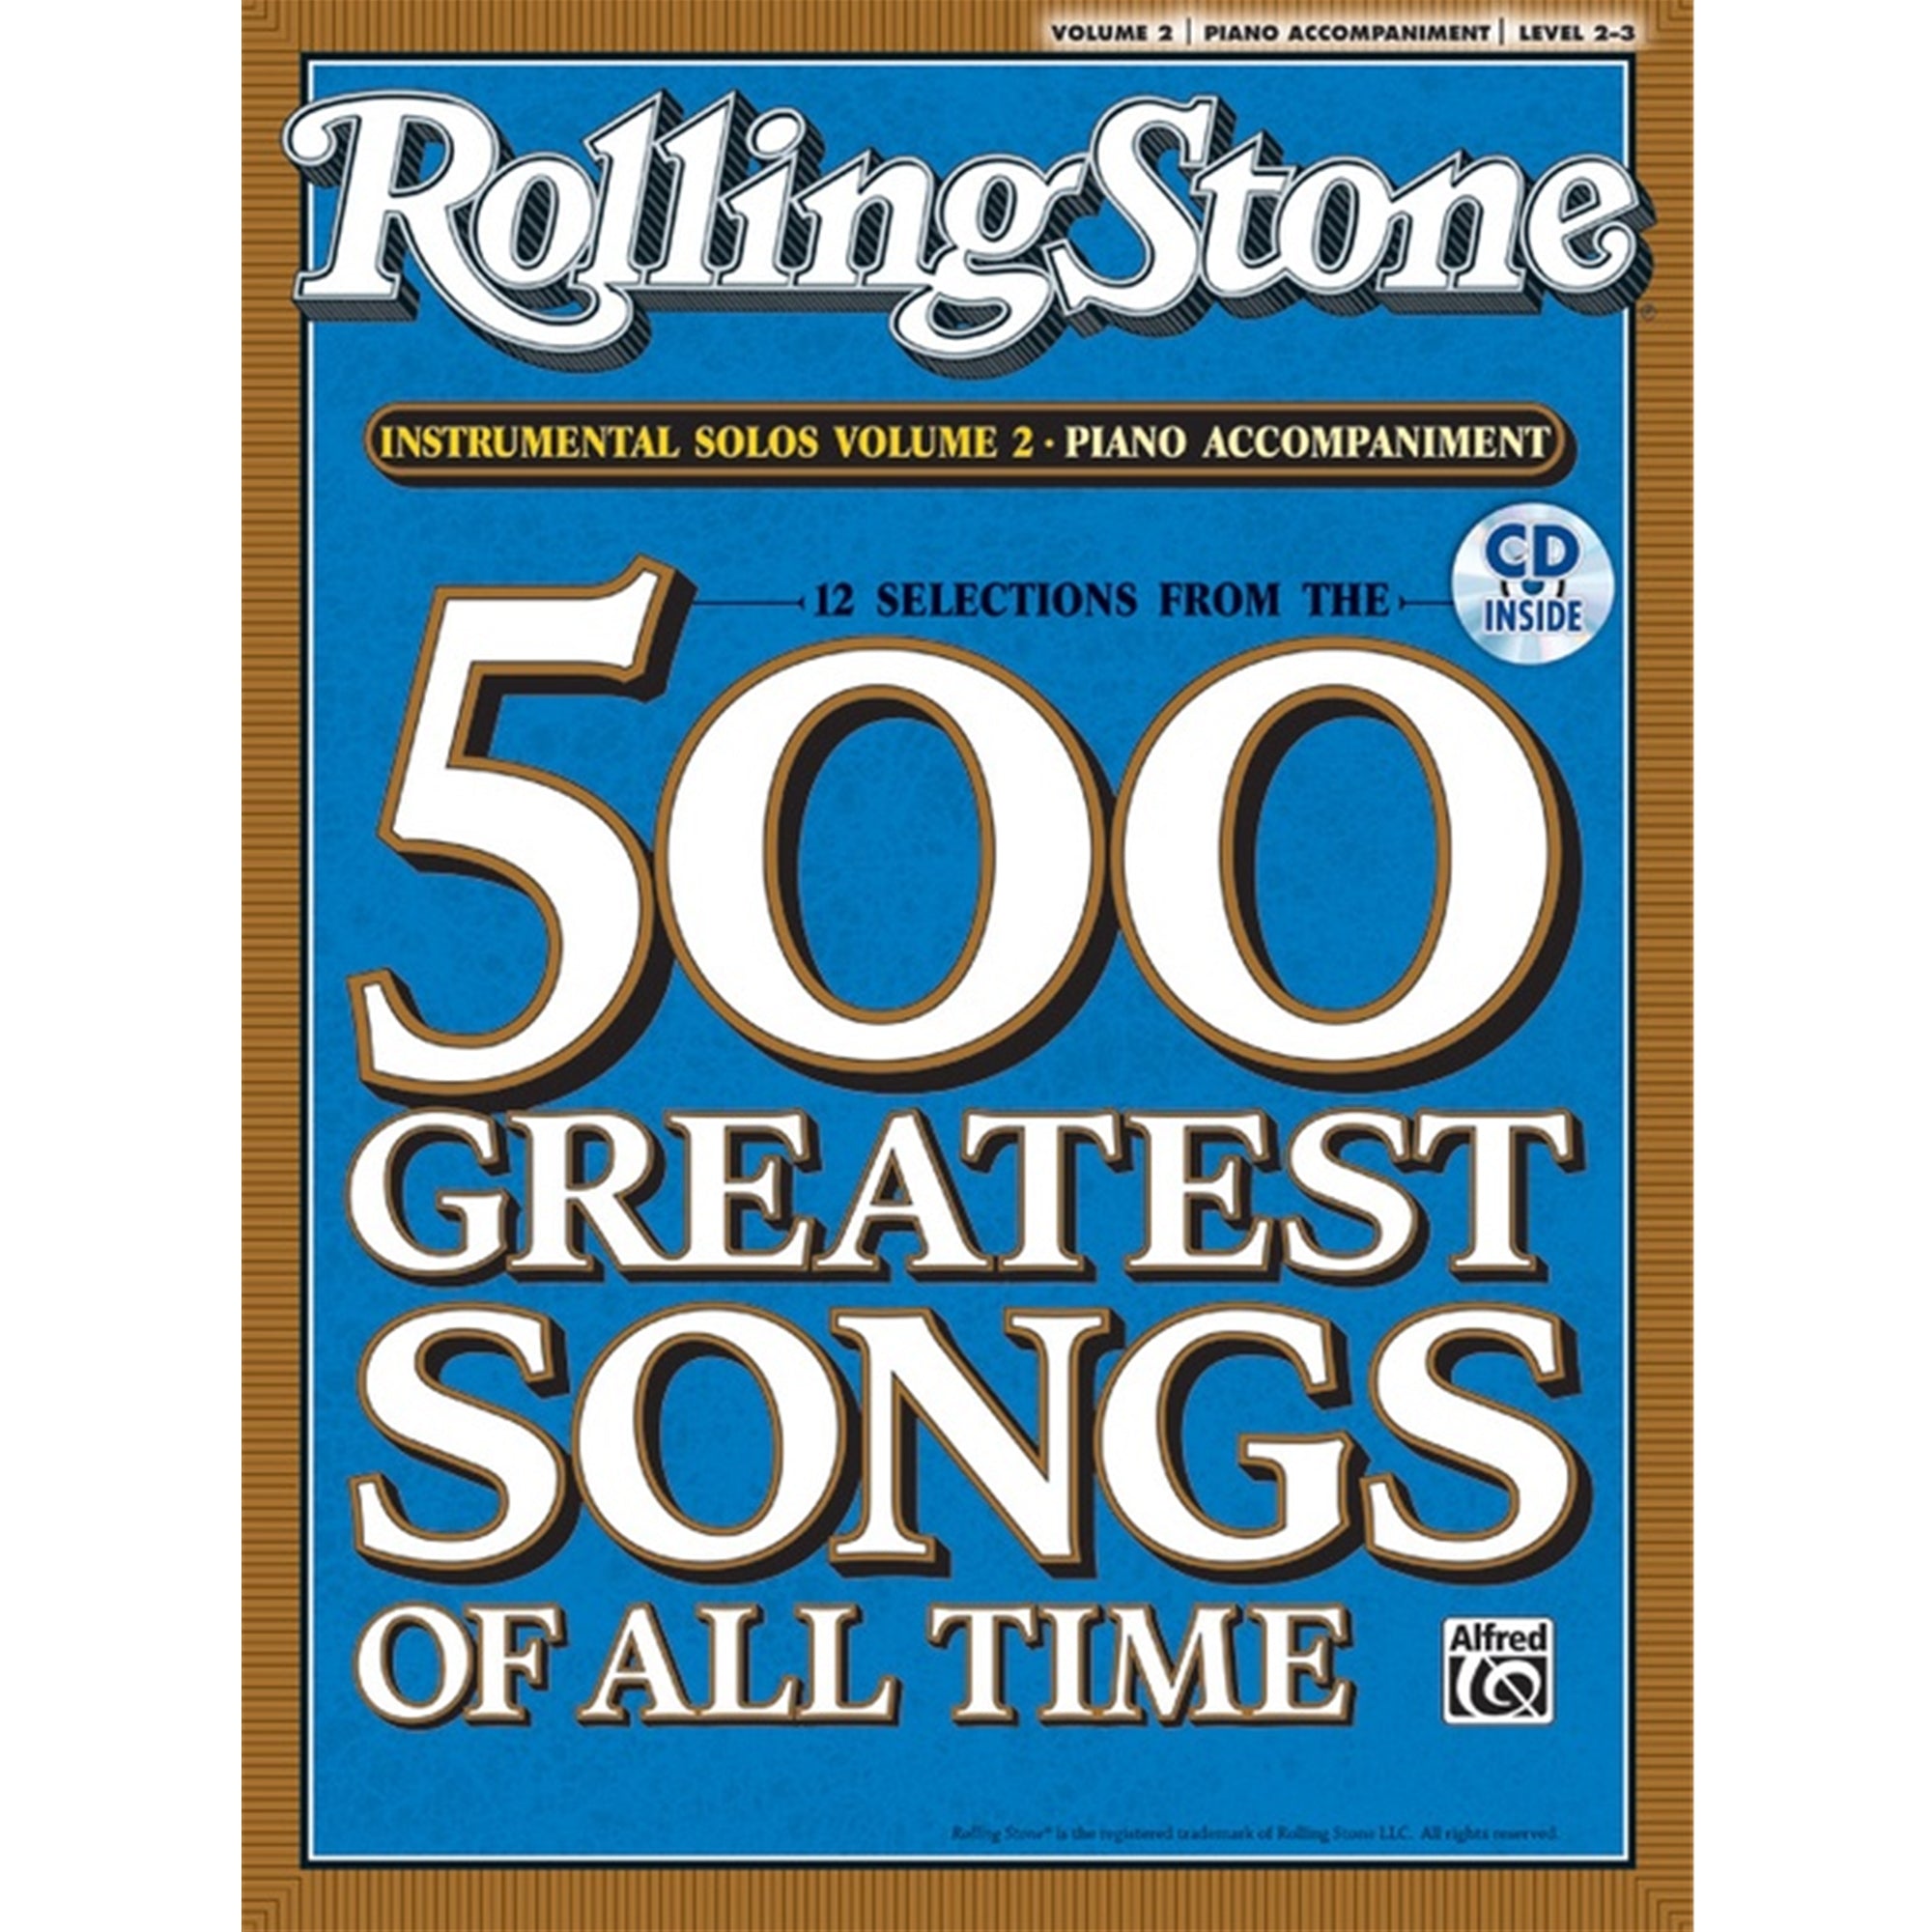 ALFRED 30863 Selections from Rolling Stone Magazine's 500 Greatest Songs of All Time: Instrumental Solos, Volume